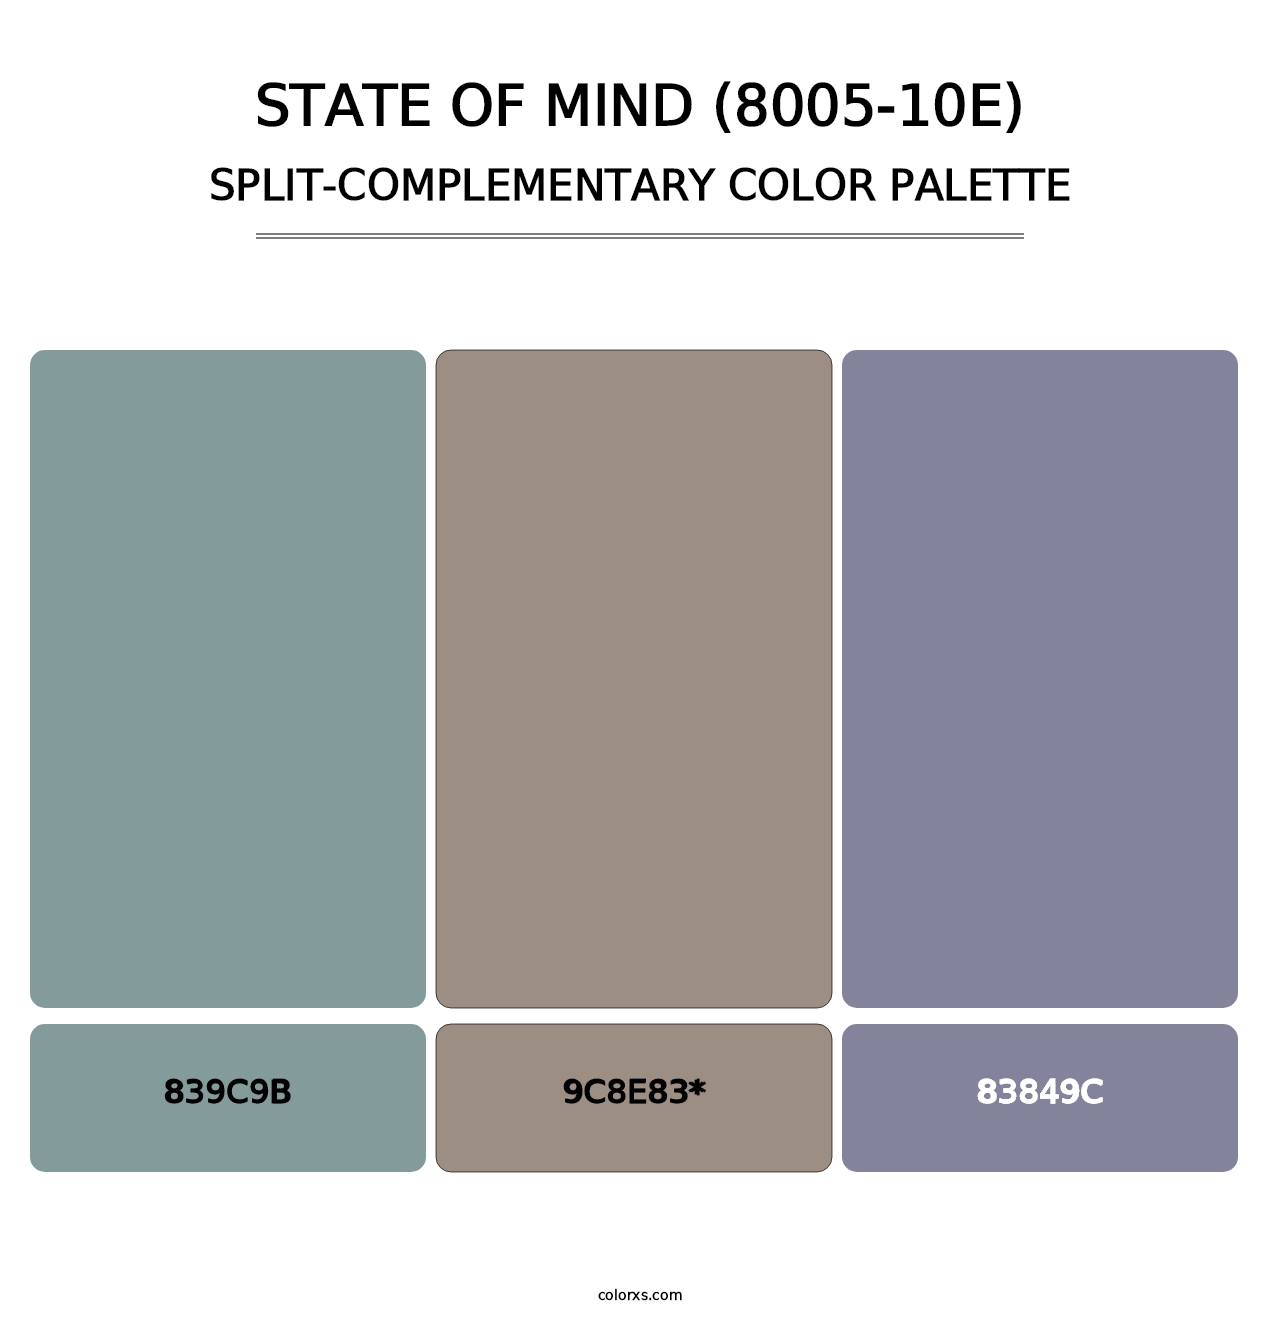 State of Mind (8005-10E) - Split-Complementary Color Palette